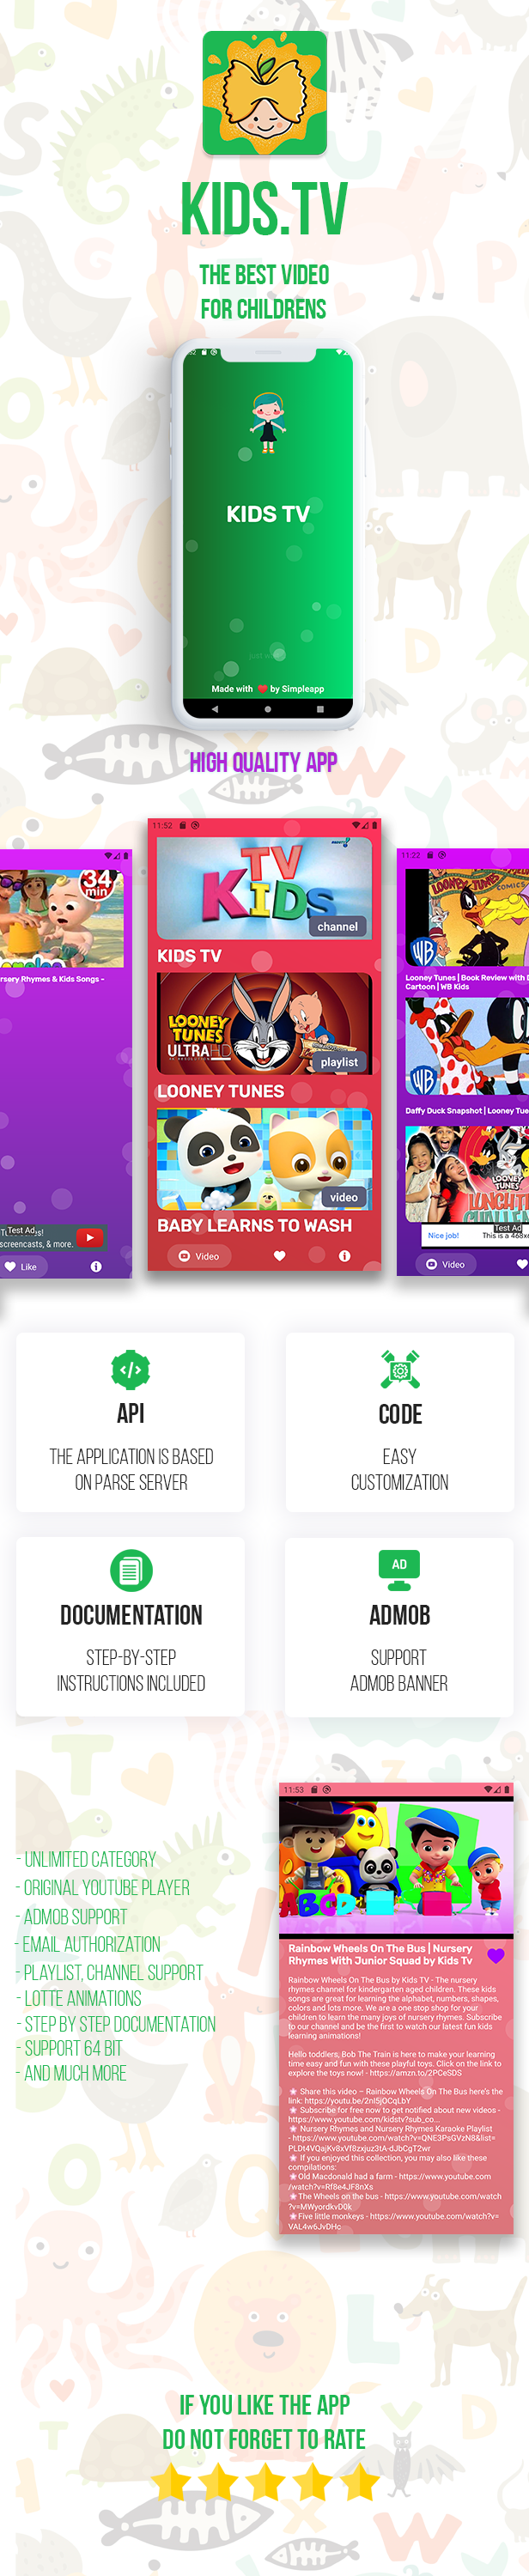 Kids TV (android, youtube) - 1